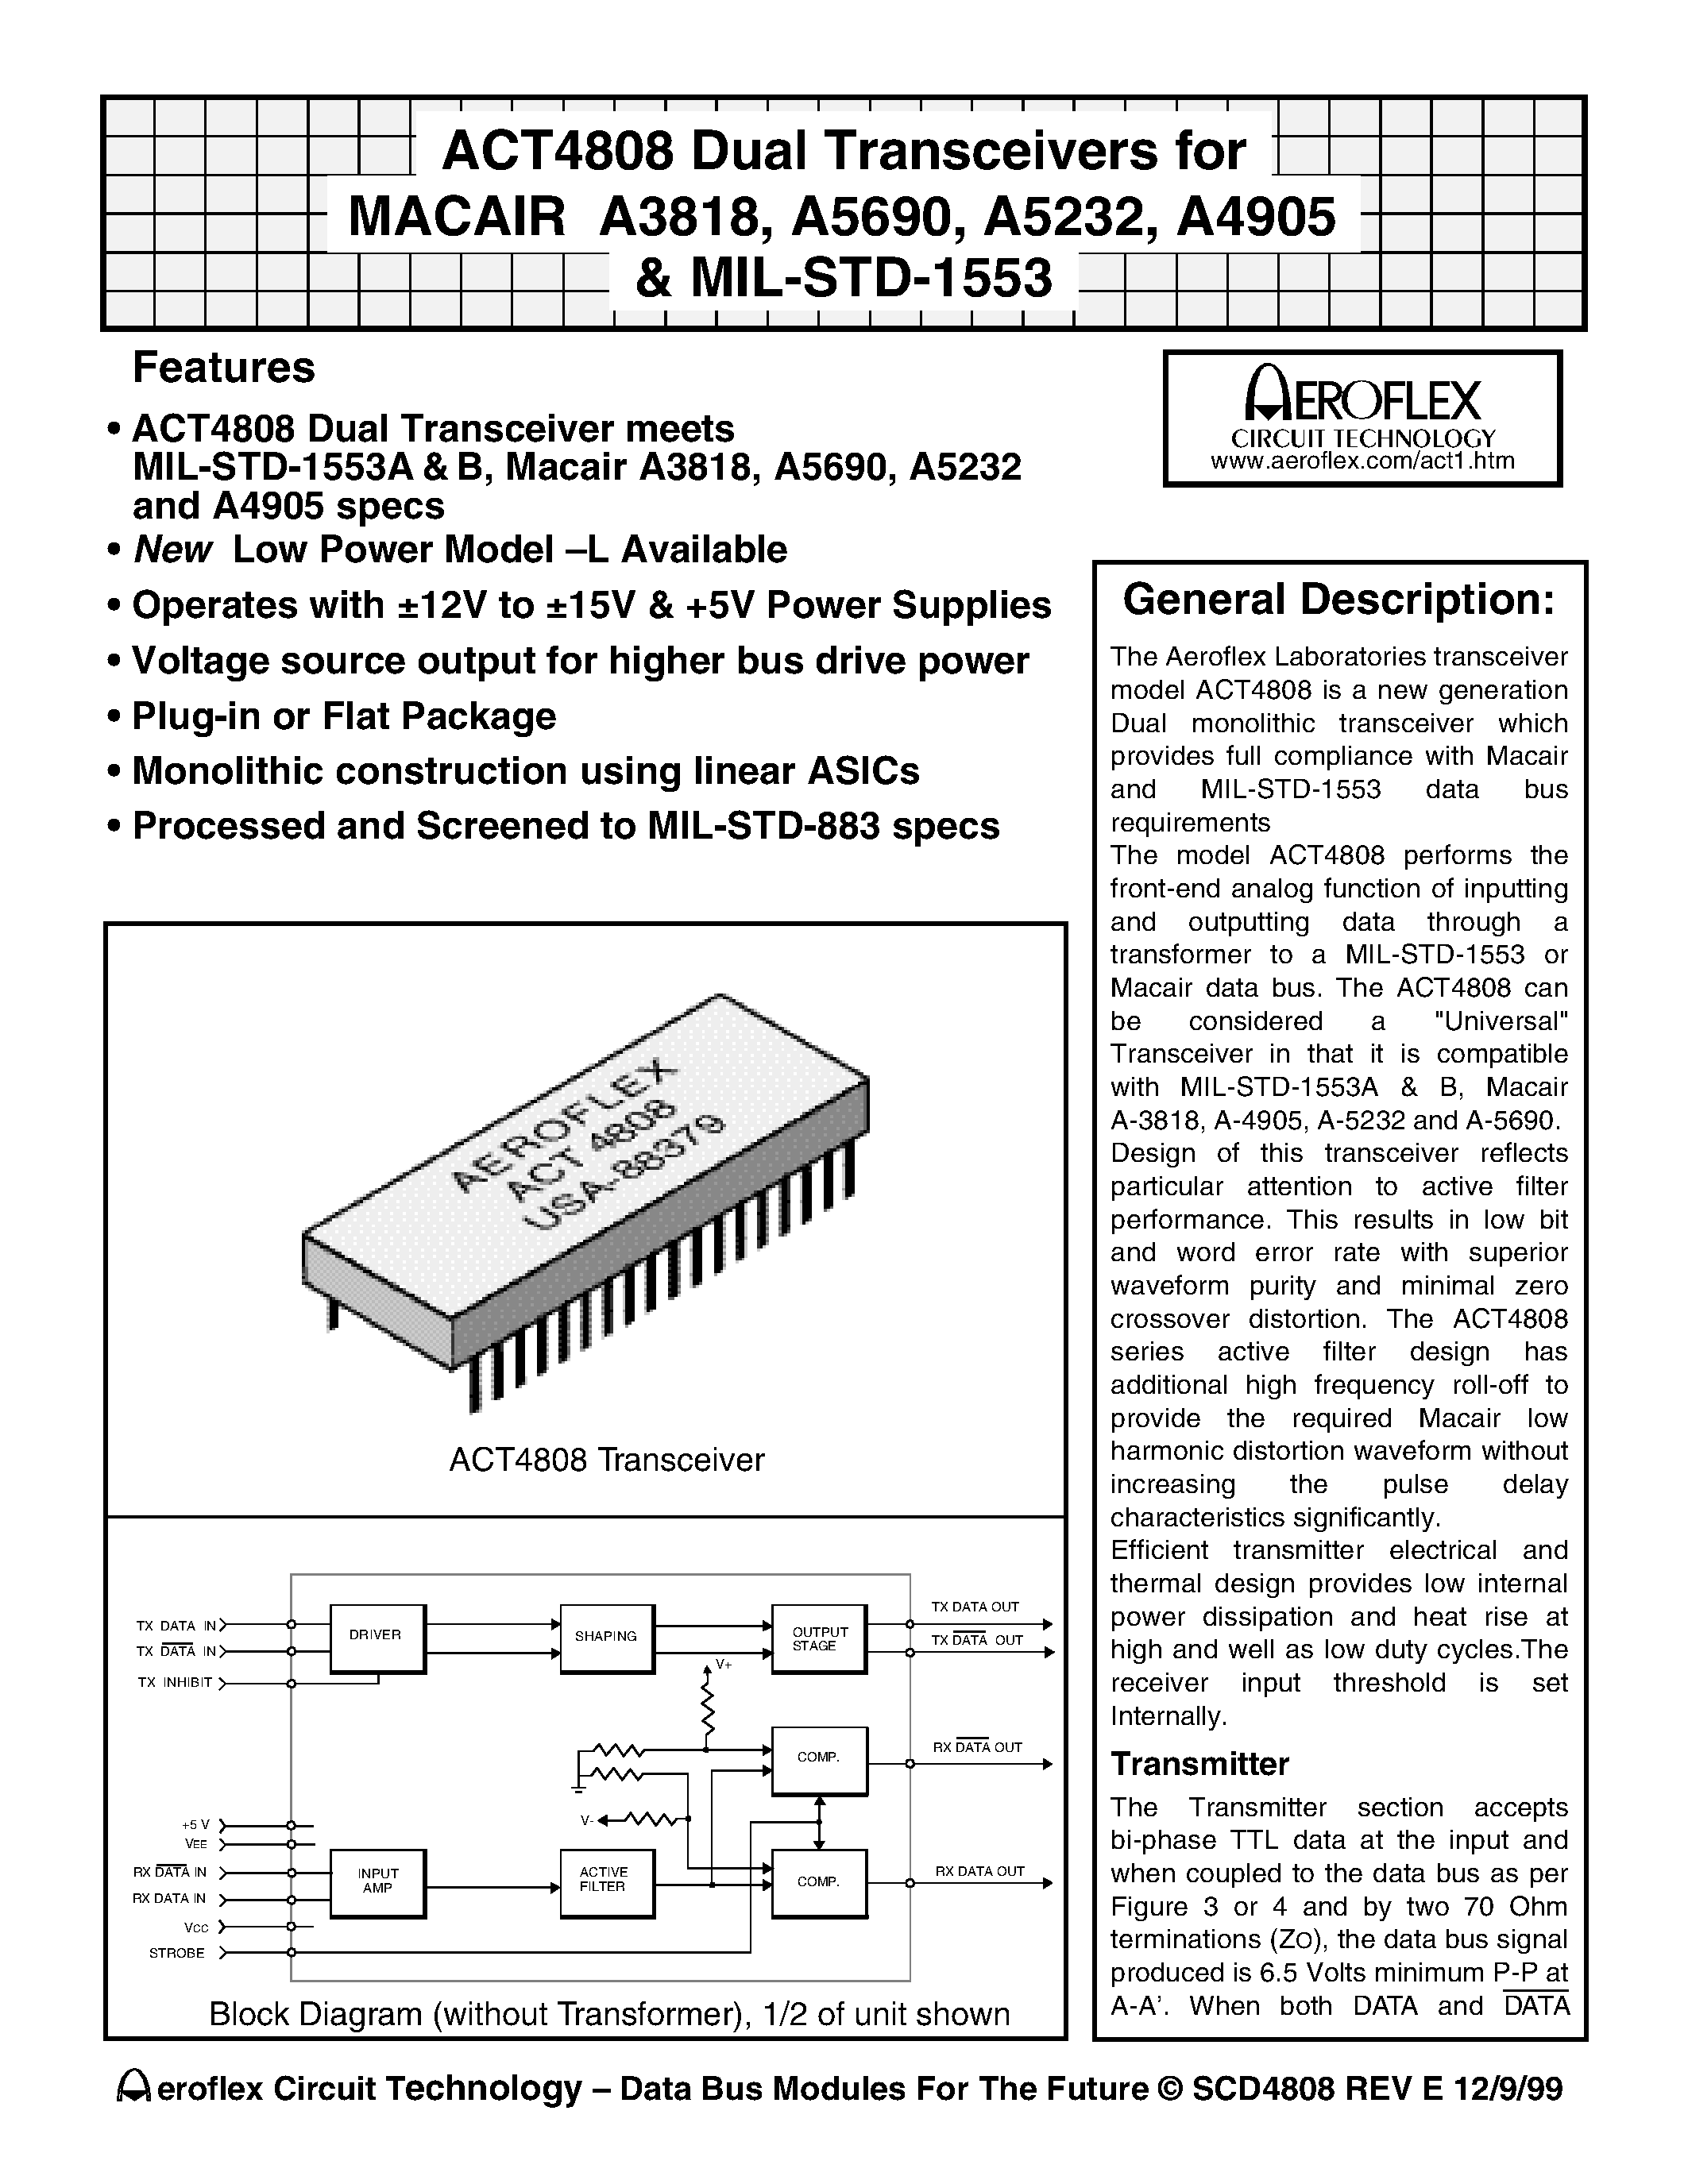 Datasheet ACT4808LDI - ACT4808 DUAL TRANSCEIVERS FOR MACAIR A3818/ A5690/ A5232/ A4905 & MIL-STD-1553 page 1